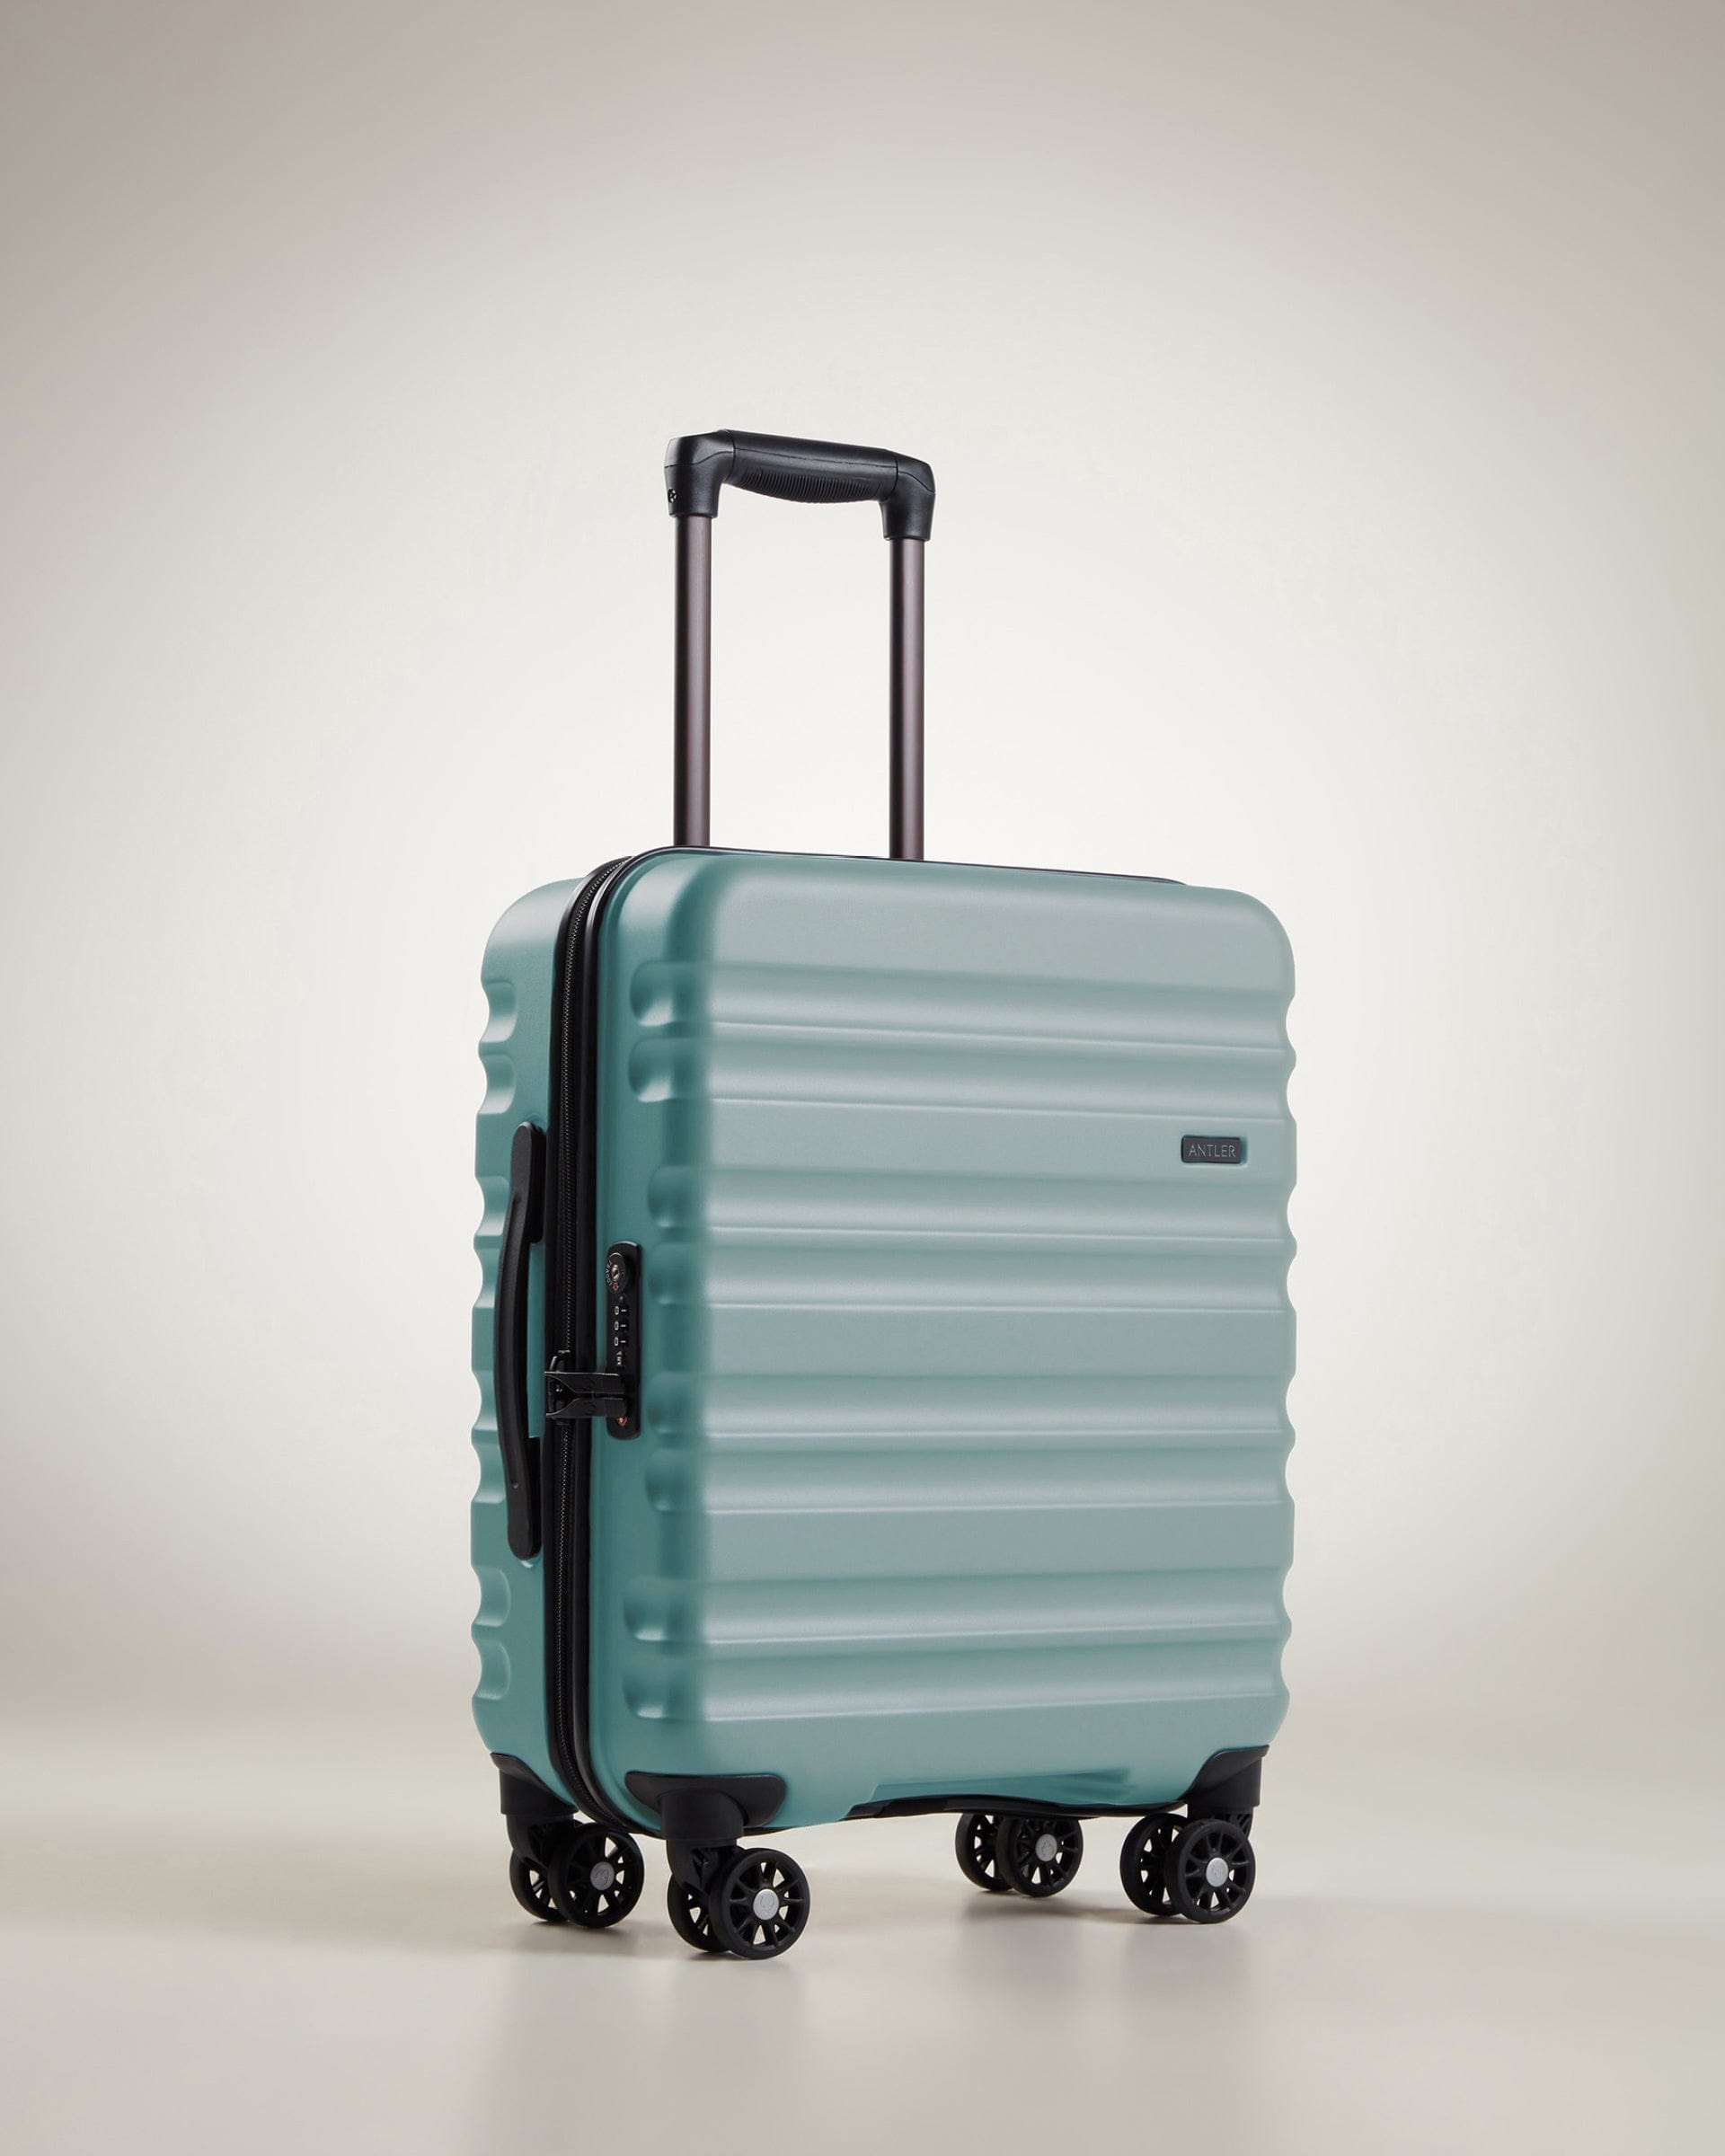 View Antler Clifton Expandable Cabin Suitcase In Mineral Size 56 x 35 x 23 cm information